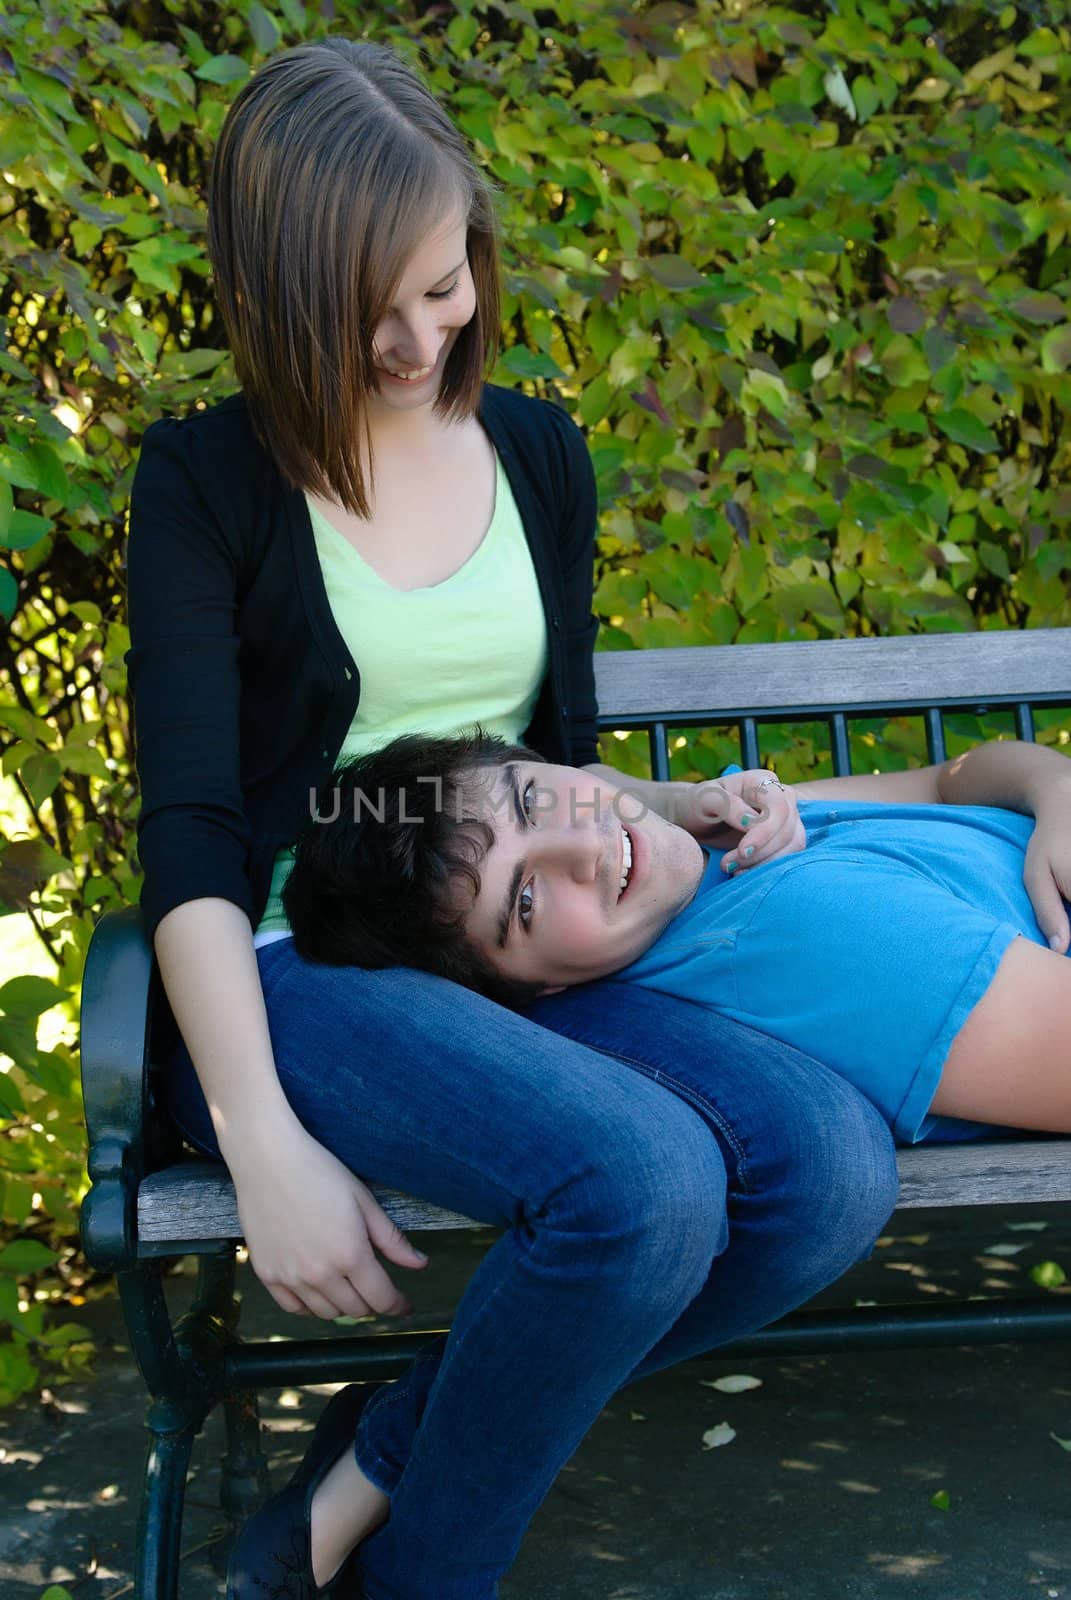 A young teen lying on his girlfriend's lap